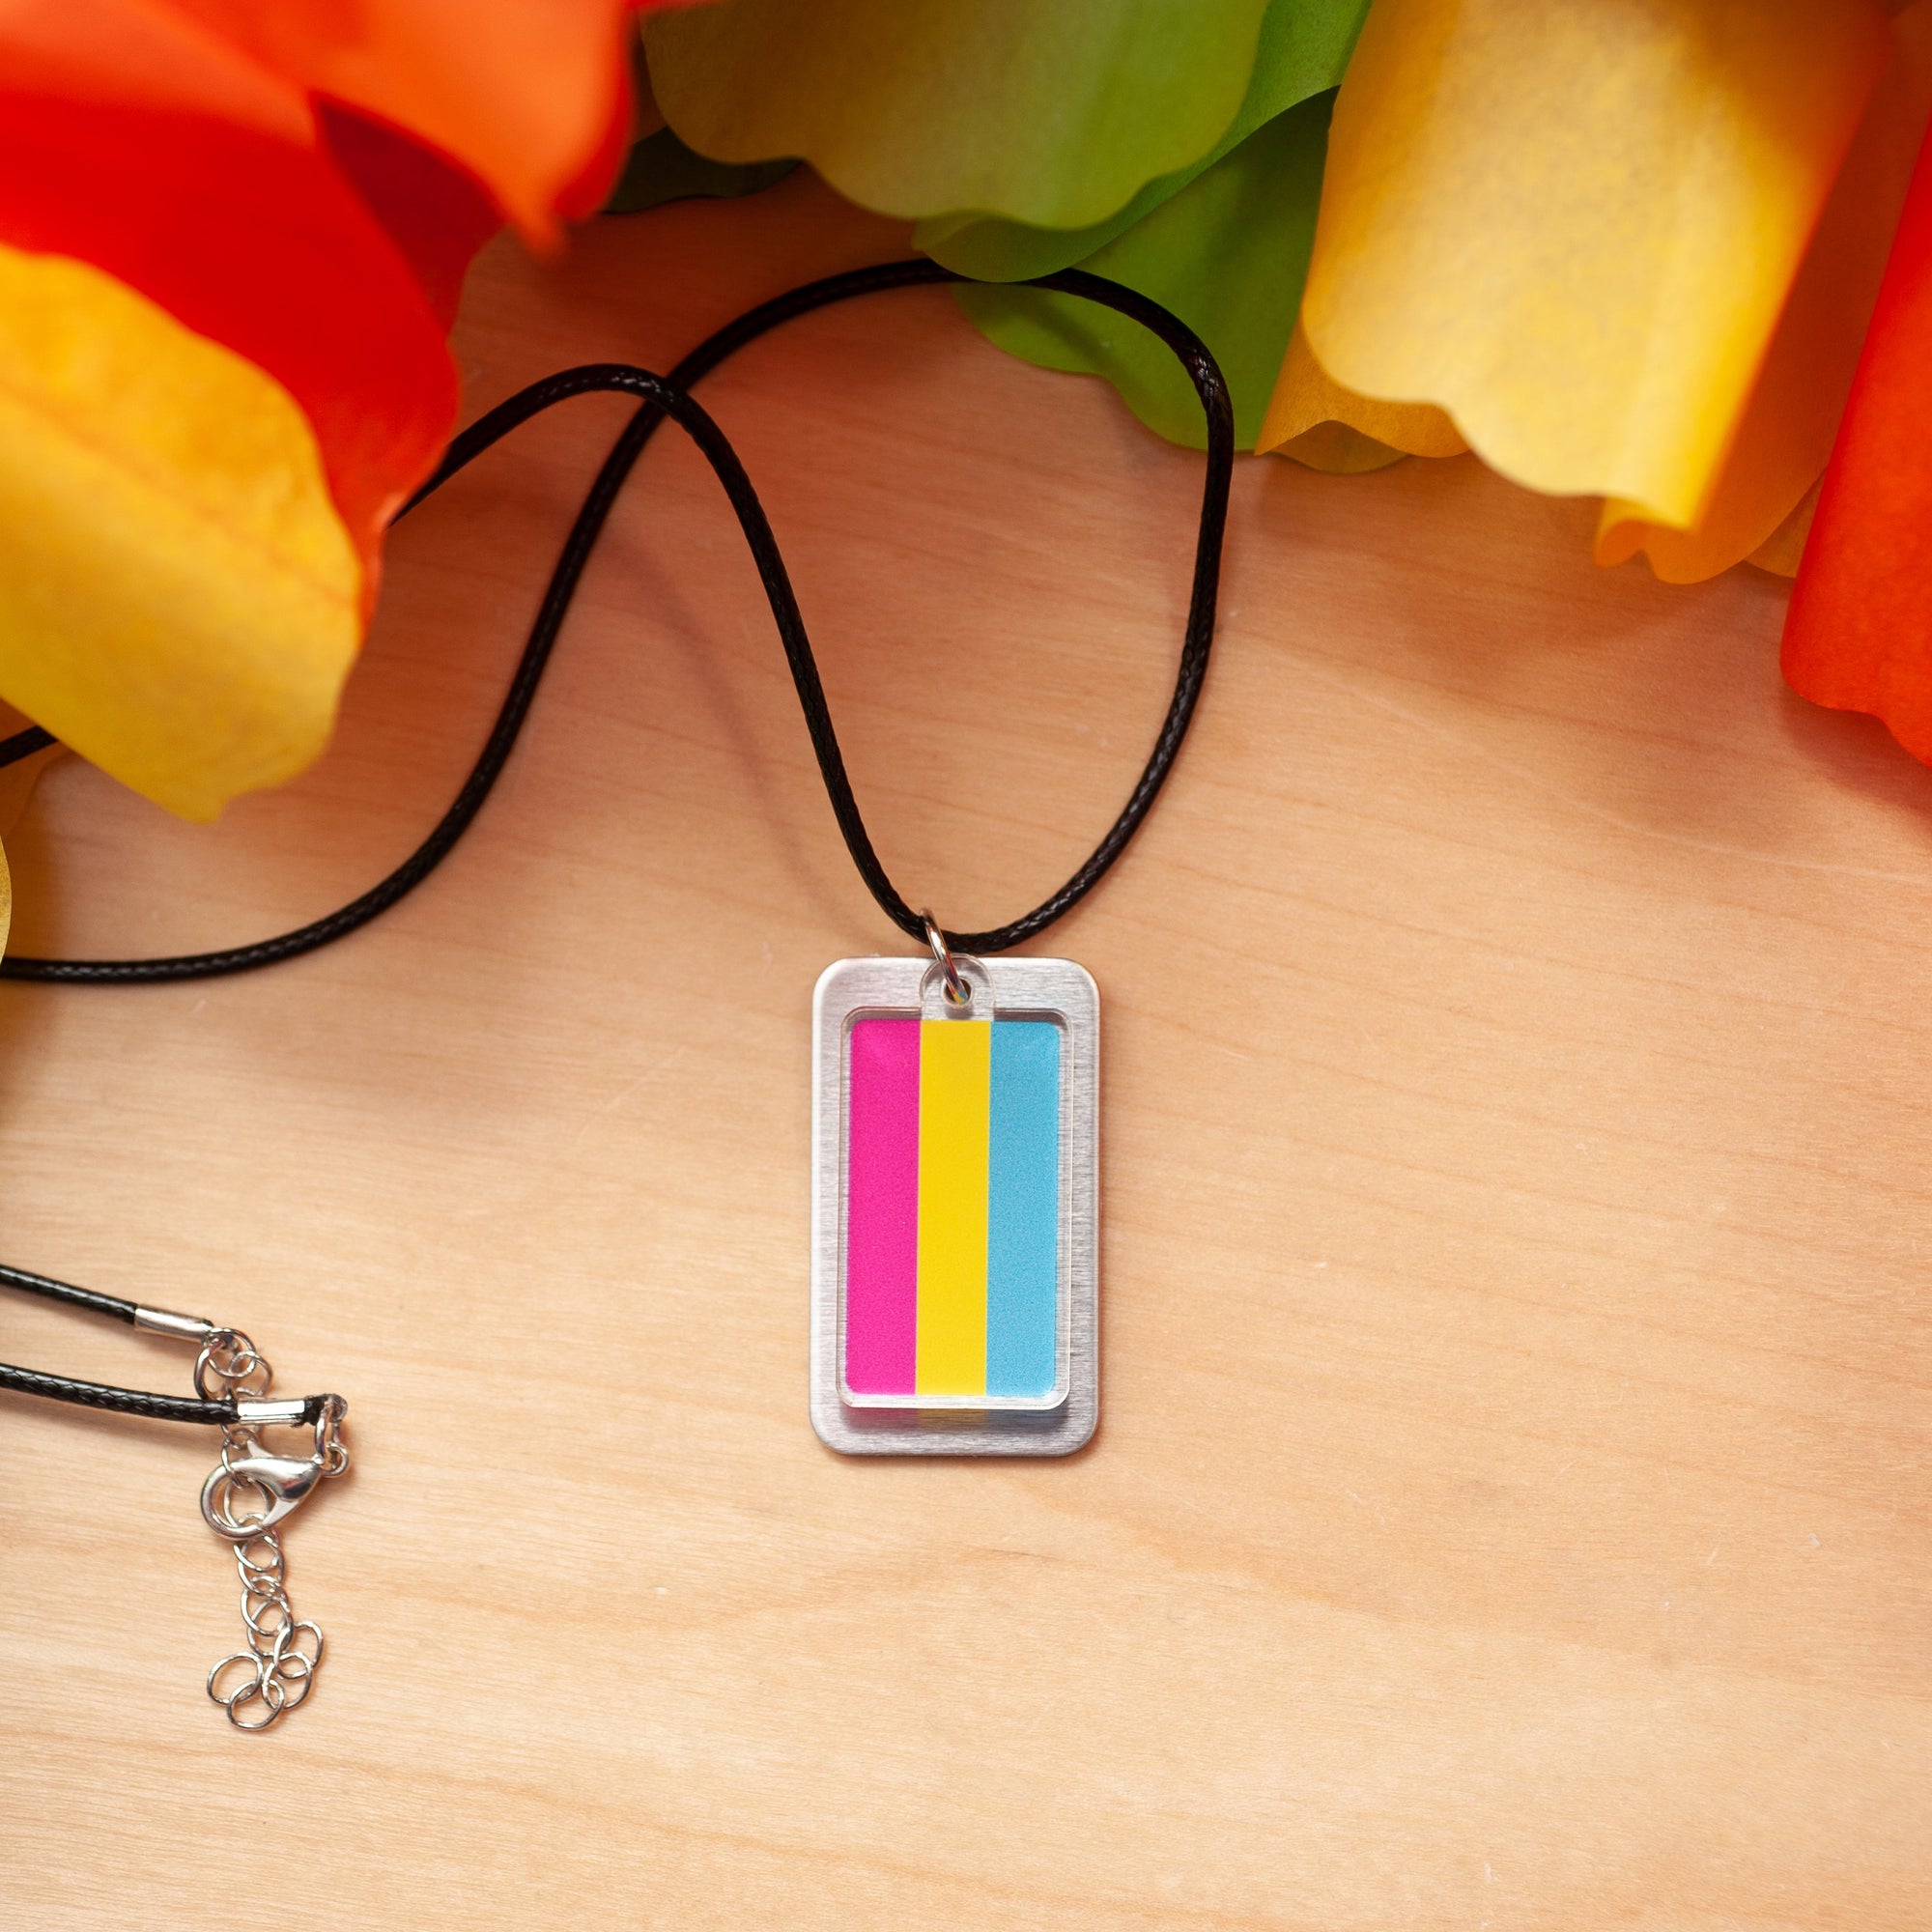 Pansexual pride flag necklace